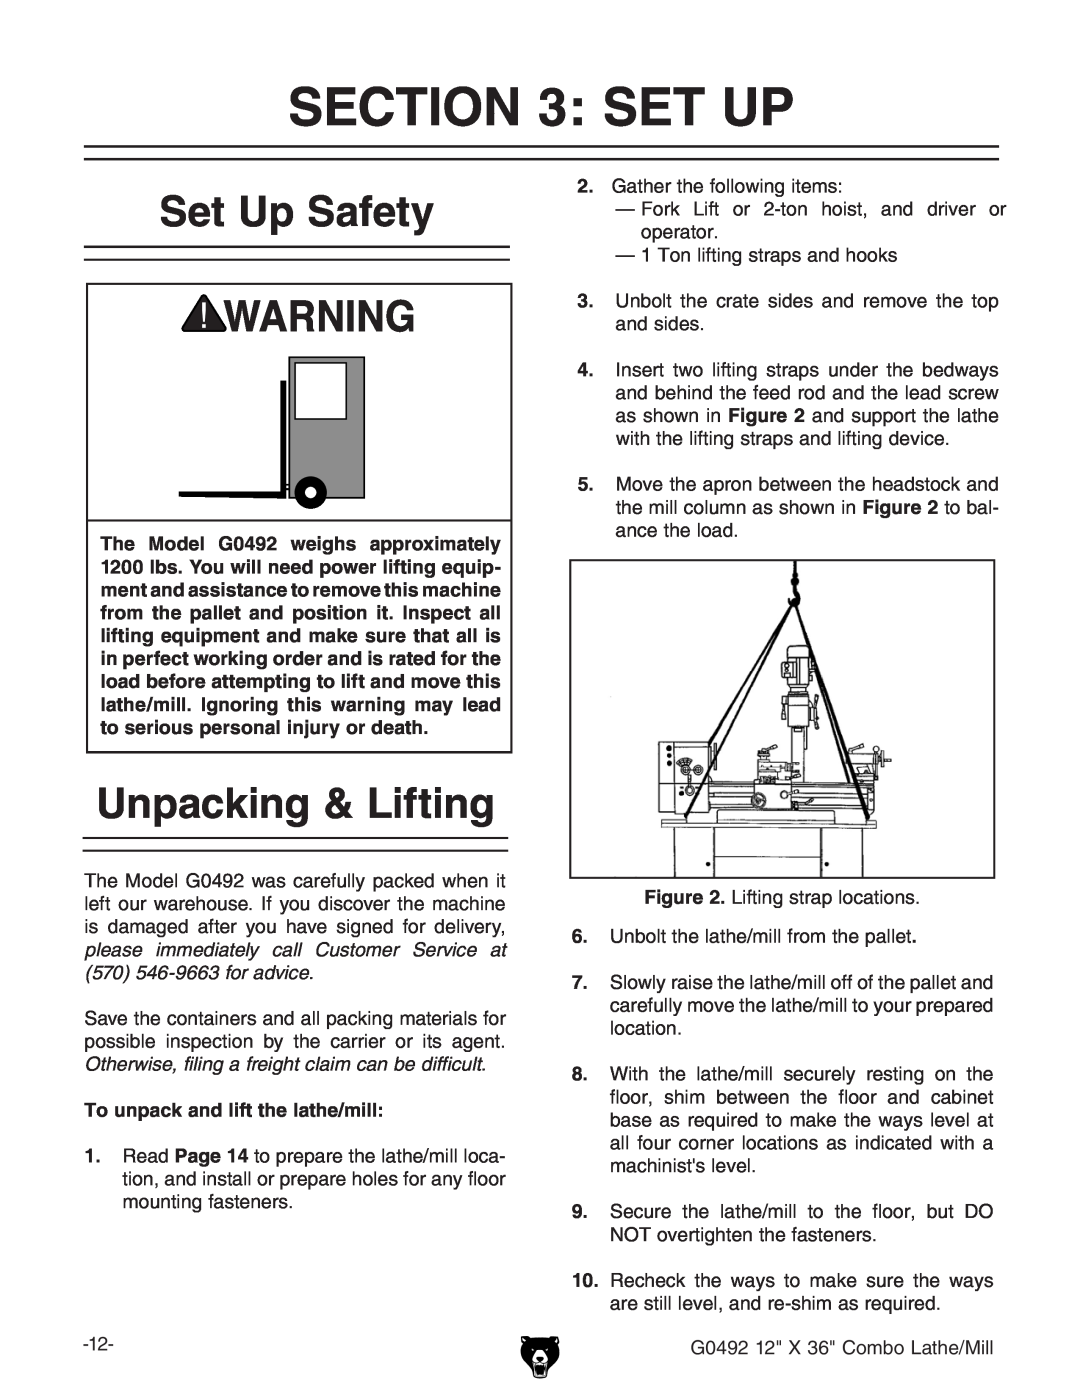 Grizzly G0492 manual Set Up Safety, Unpacking & Lifting, To unpack and lift the lathe/mill, &M+8dbWdAViZ$Baa 